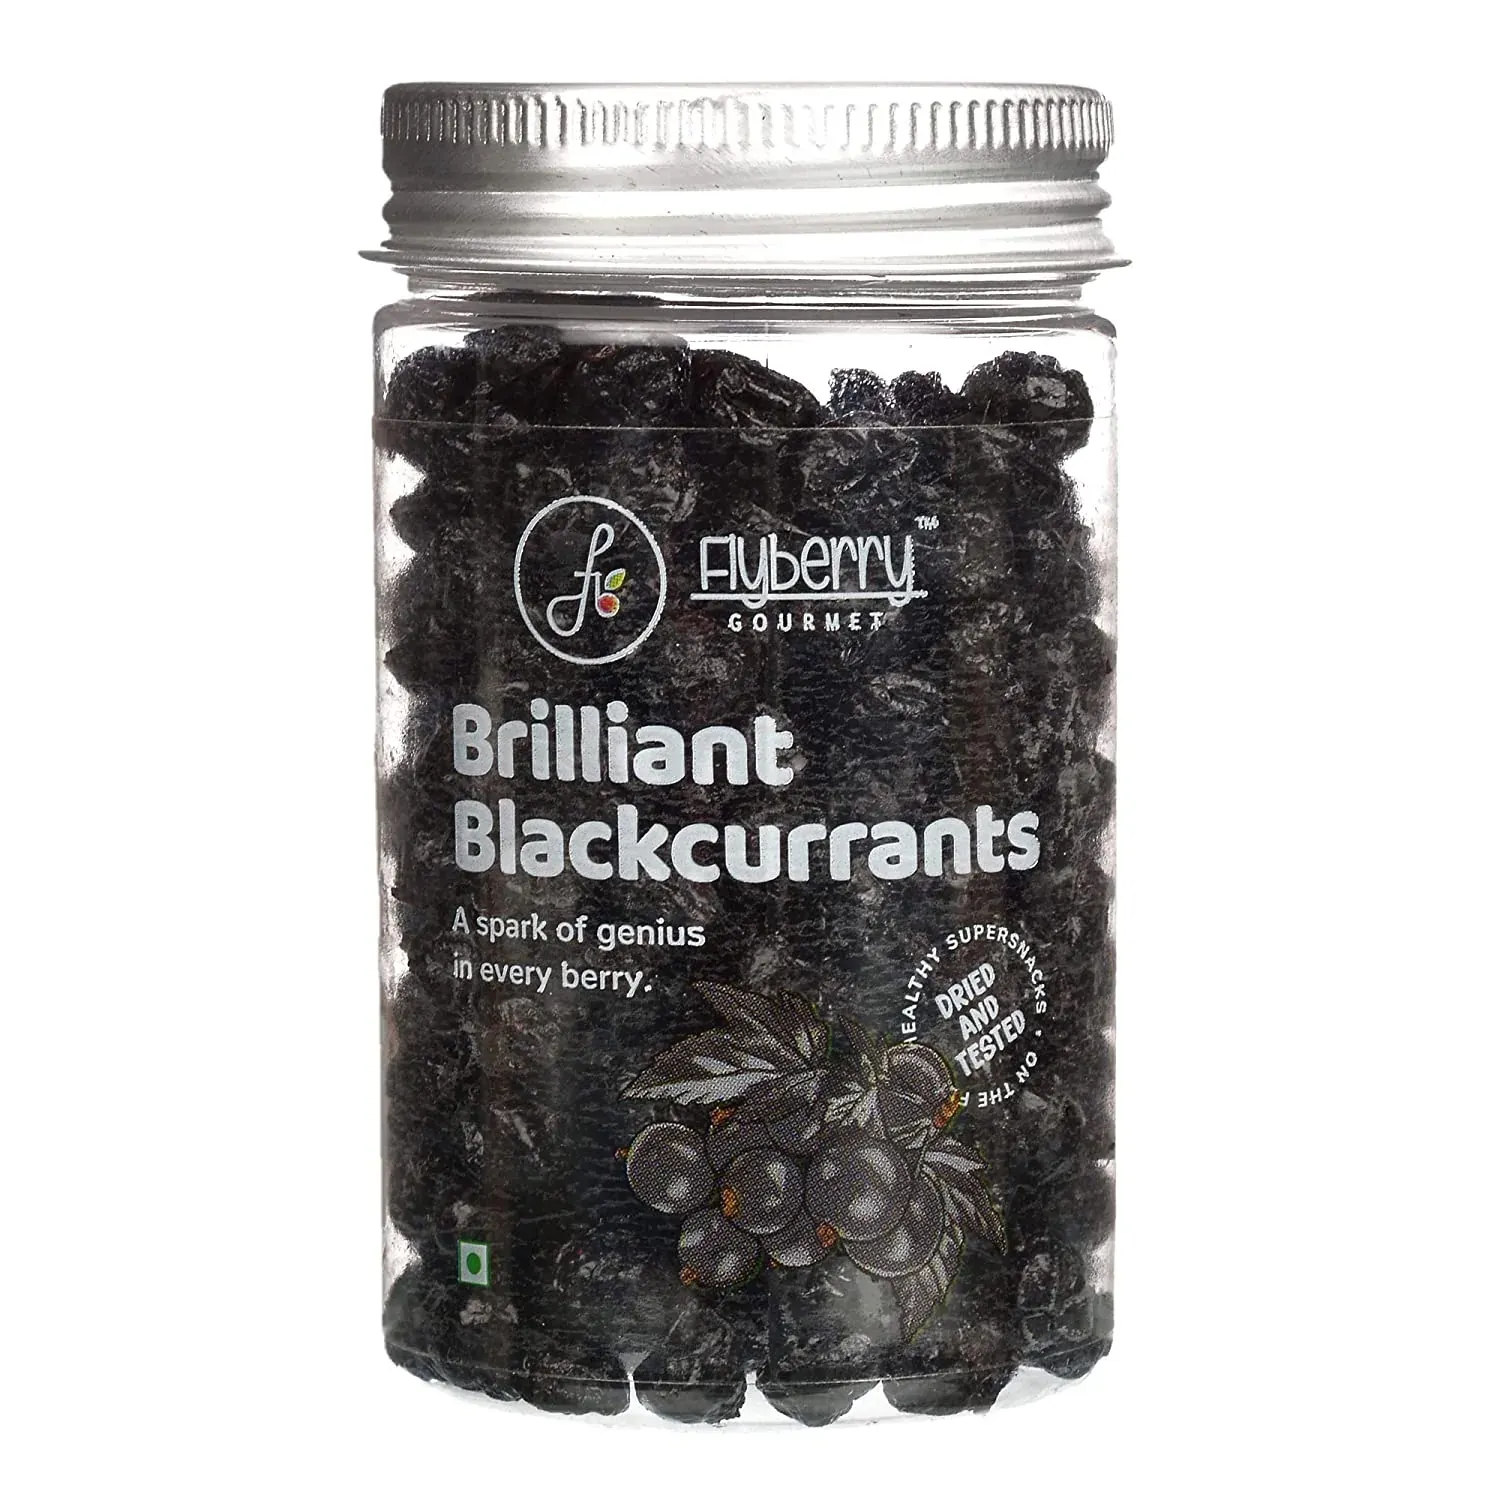 Flyberry Brilliant Blackcurrants Image